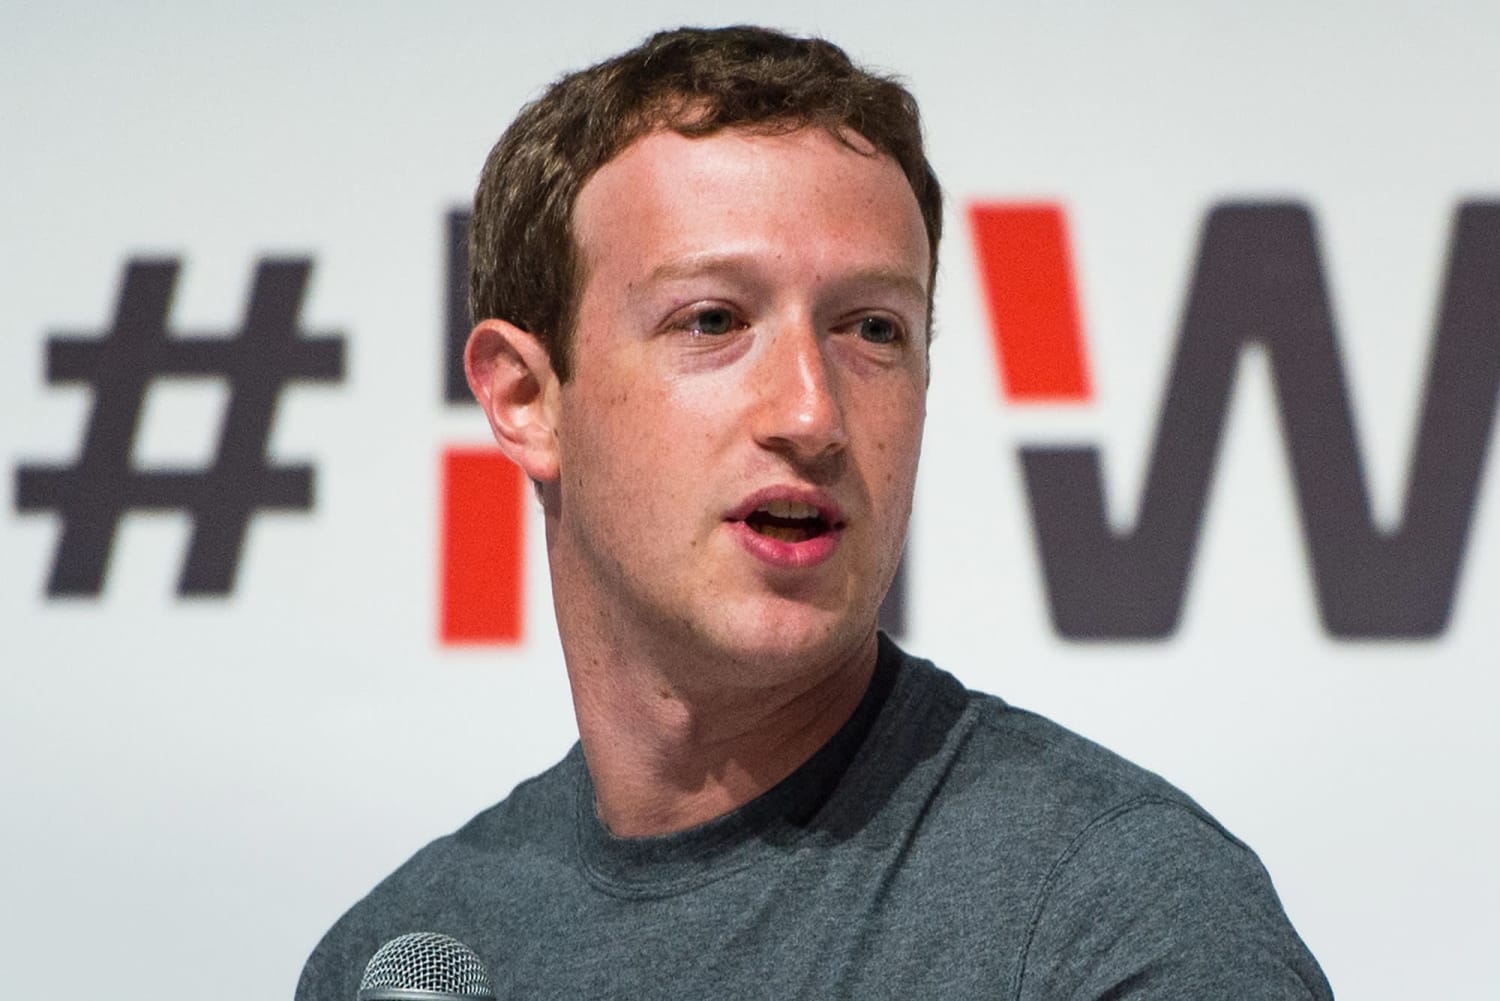 What Facebook CEO Mark Zuckerberg is more afraid of than screwing up his $438 billion company